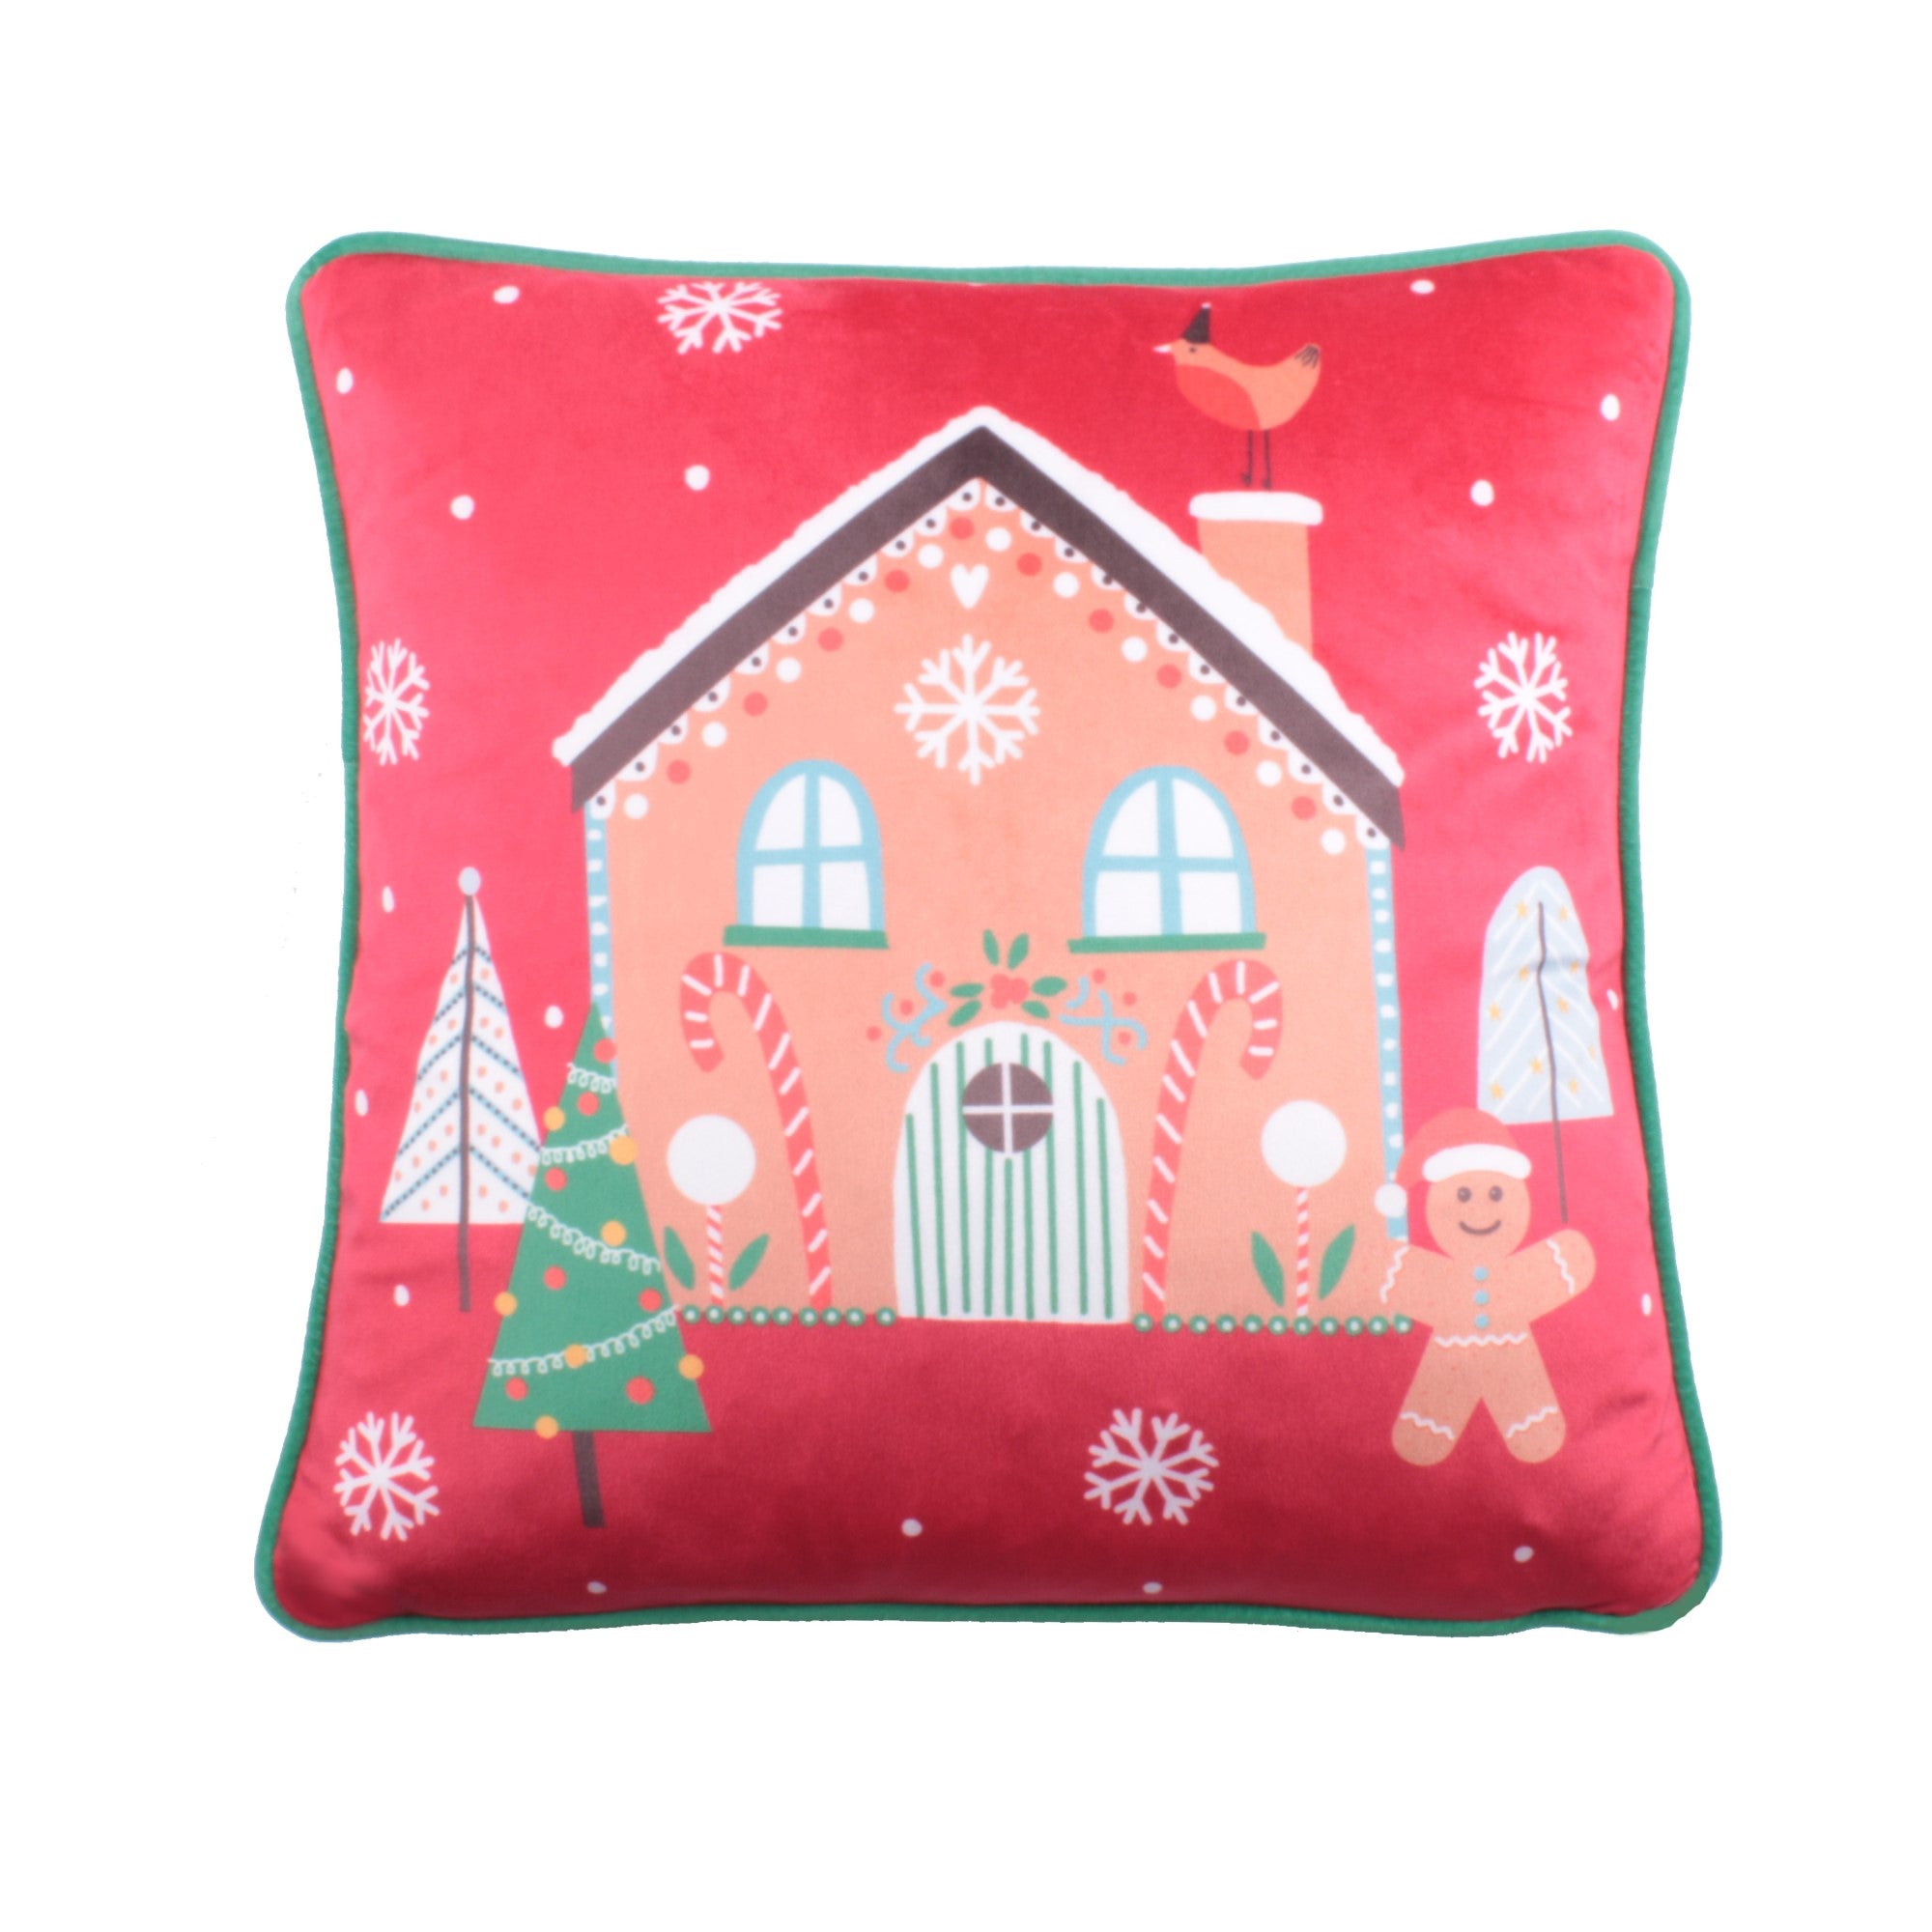 Cushion Cover Gingerbread Man by Fusion Christmas in Multi